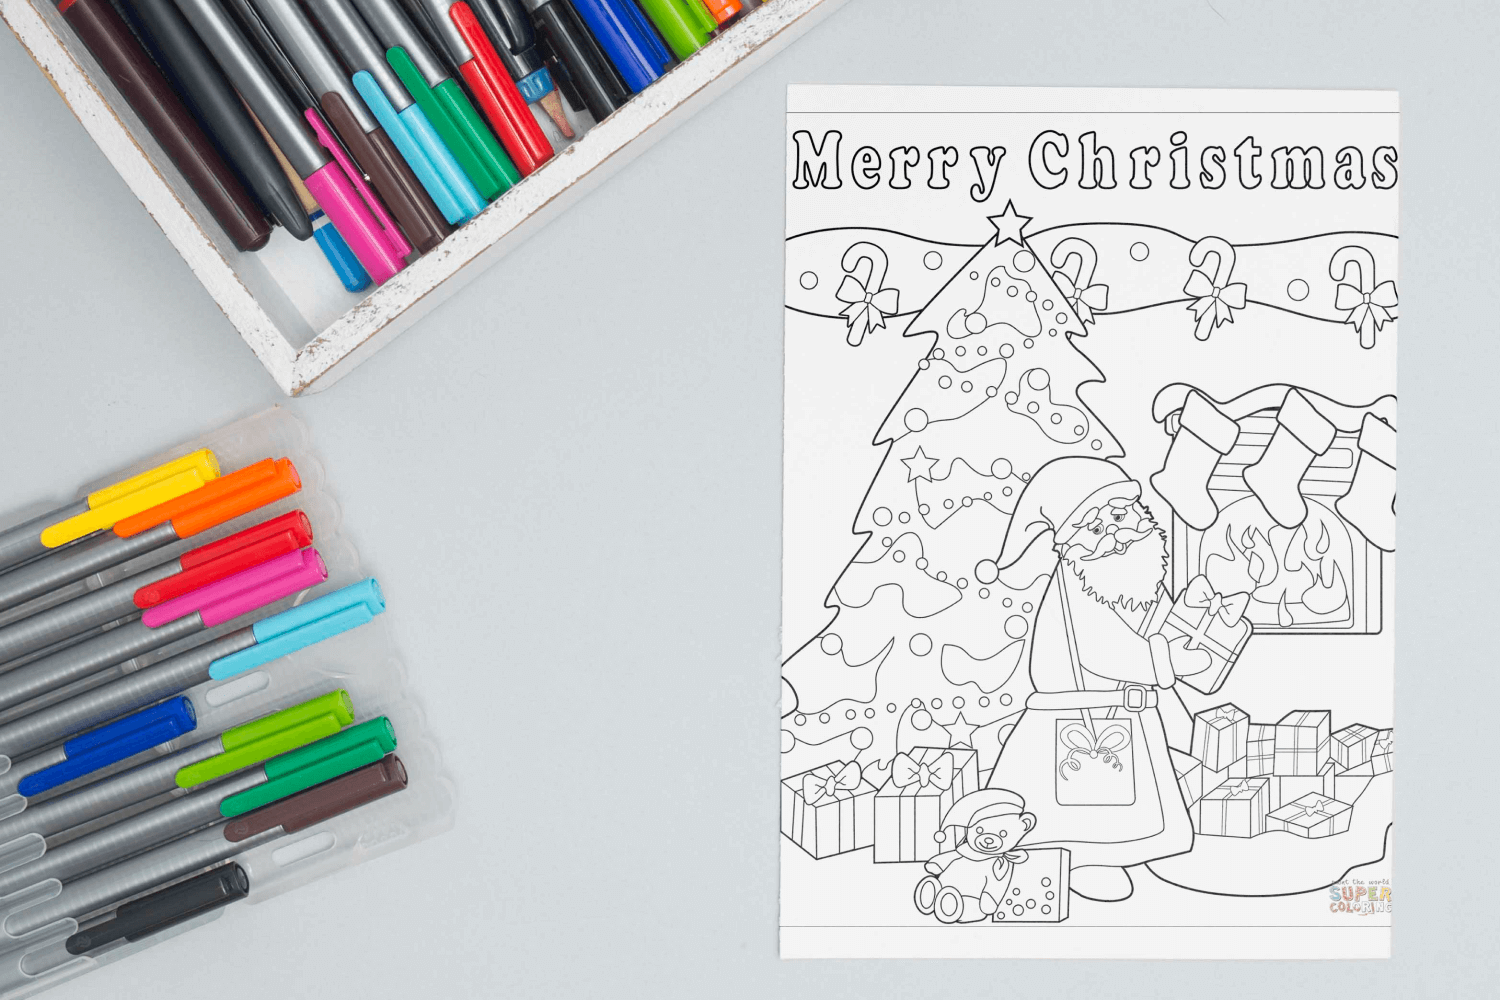 Merry Christmas coloring page facebook image.